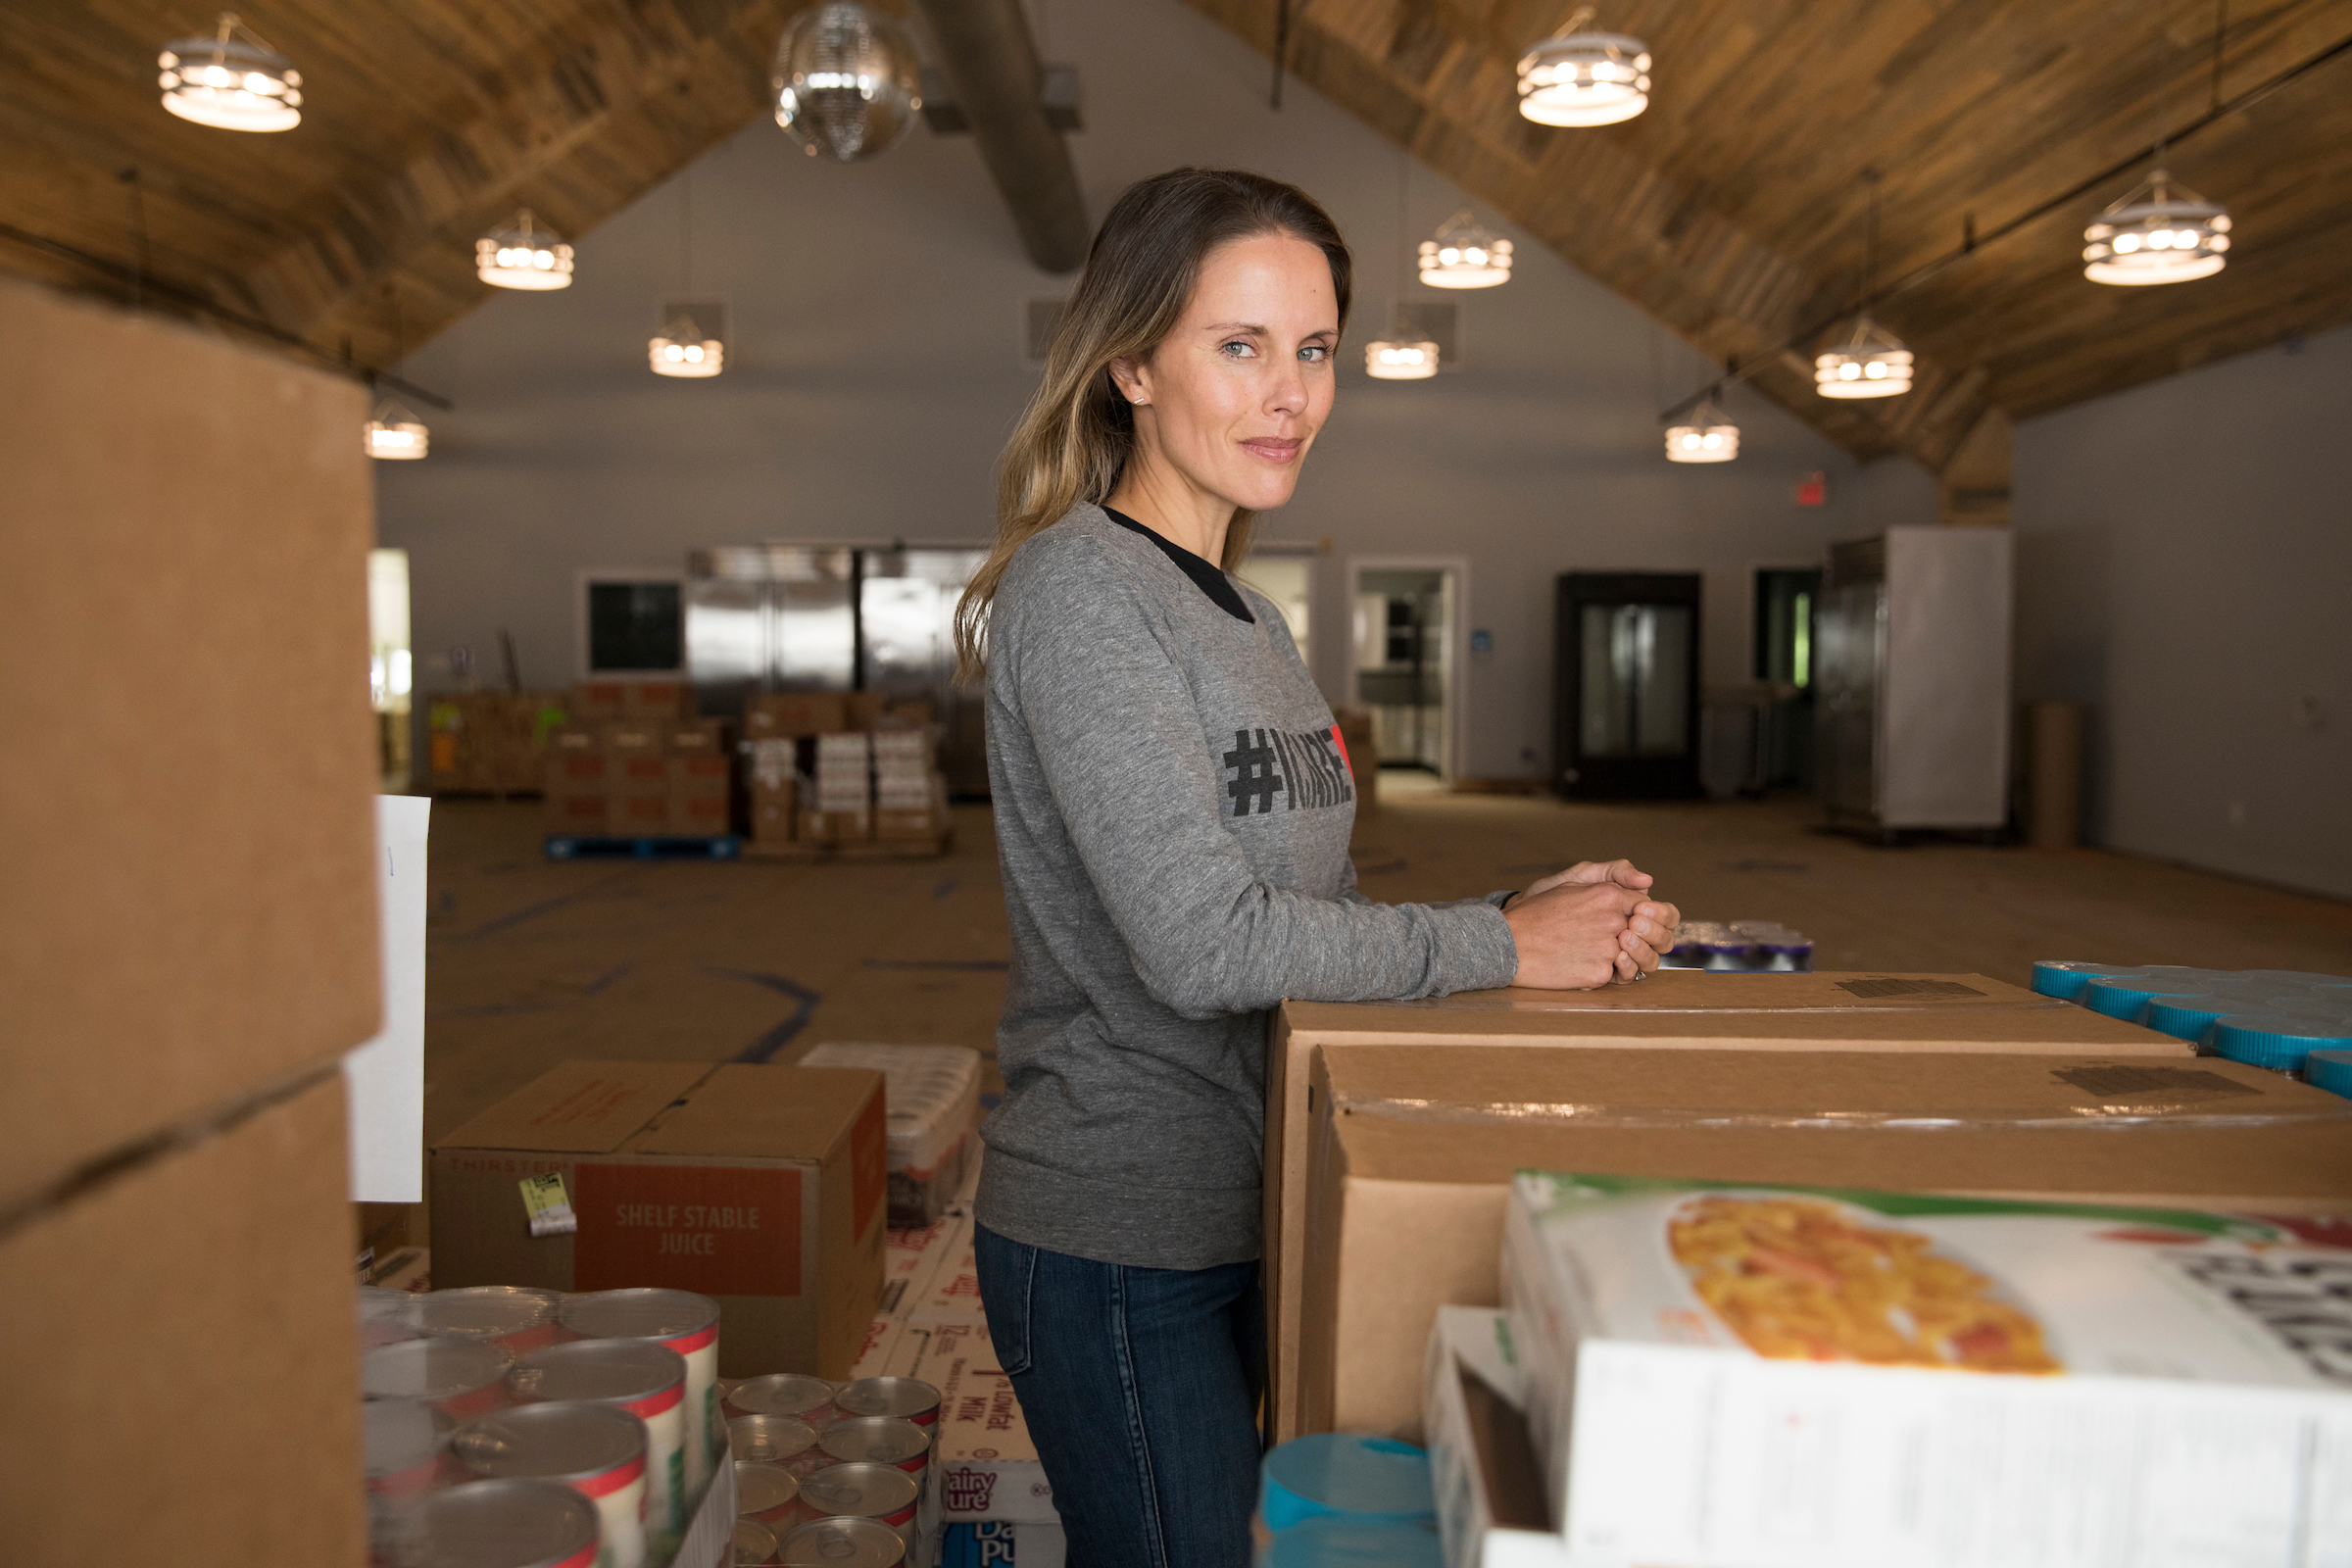 Marit Molin at JBJ Soul Kitchen Food Bank, which partnered with her organization, Hamptons Community Outreach.  LORI HAWKINS